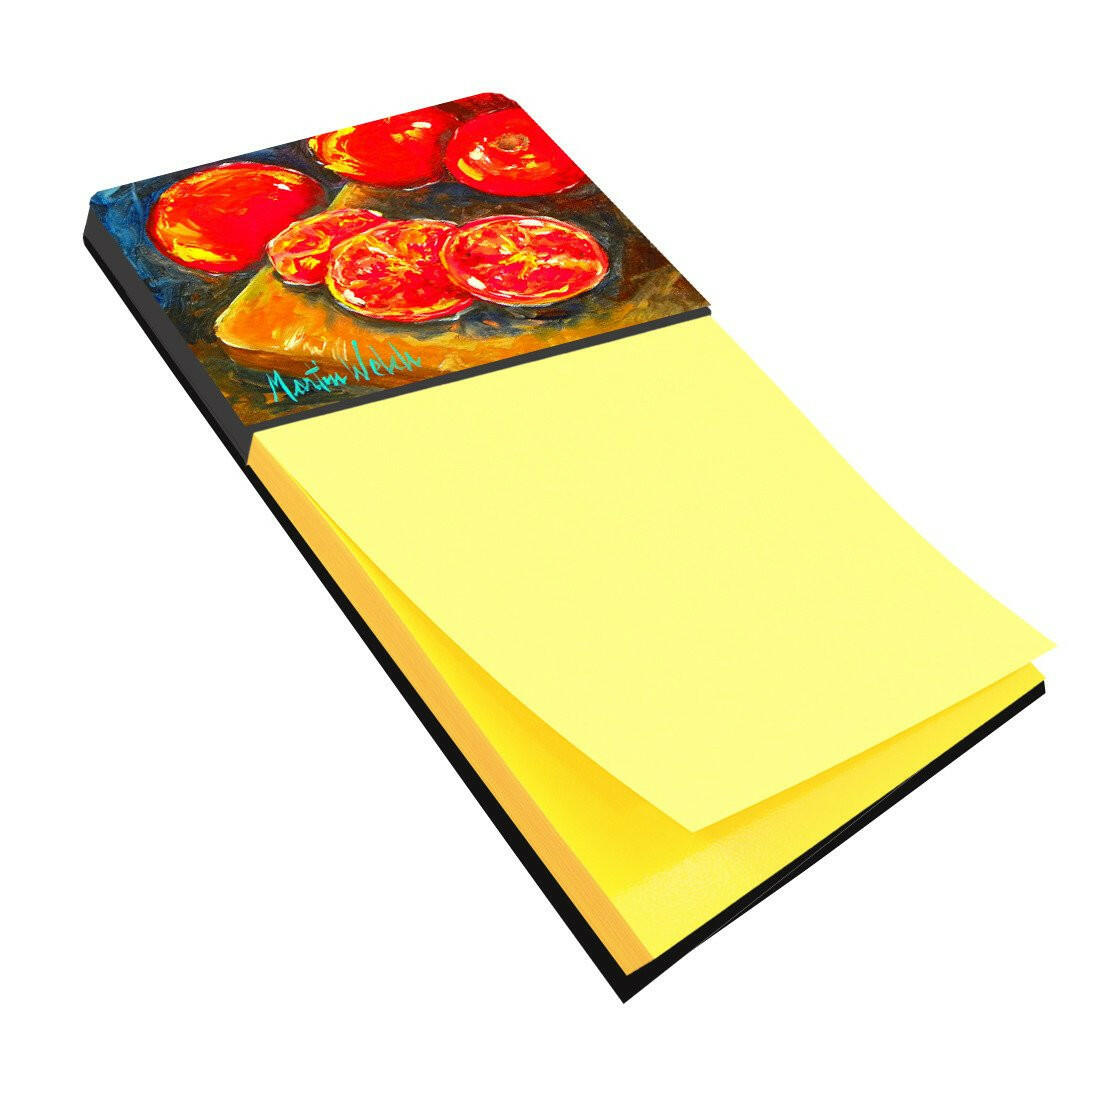 Vegetables - Tomatoes Slice It Up Refiillable Sticky Note Holder or Postit Note Dispenser MW1099SN by Caroline's Treasures